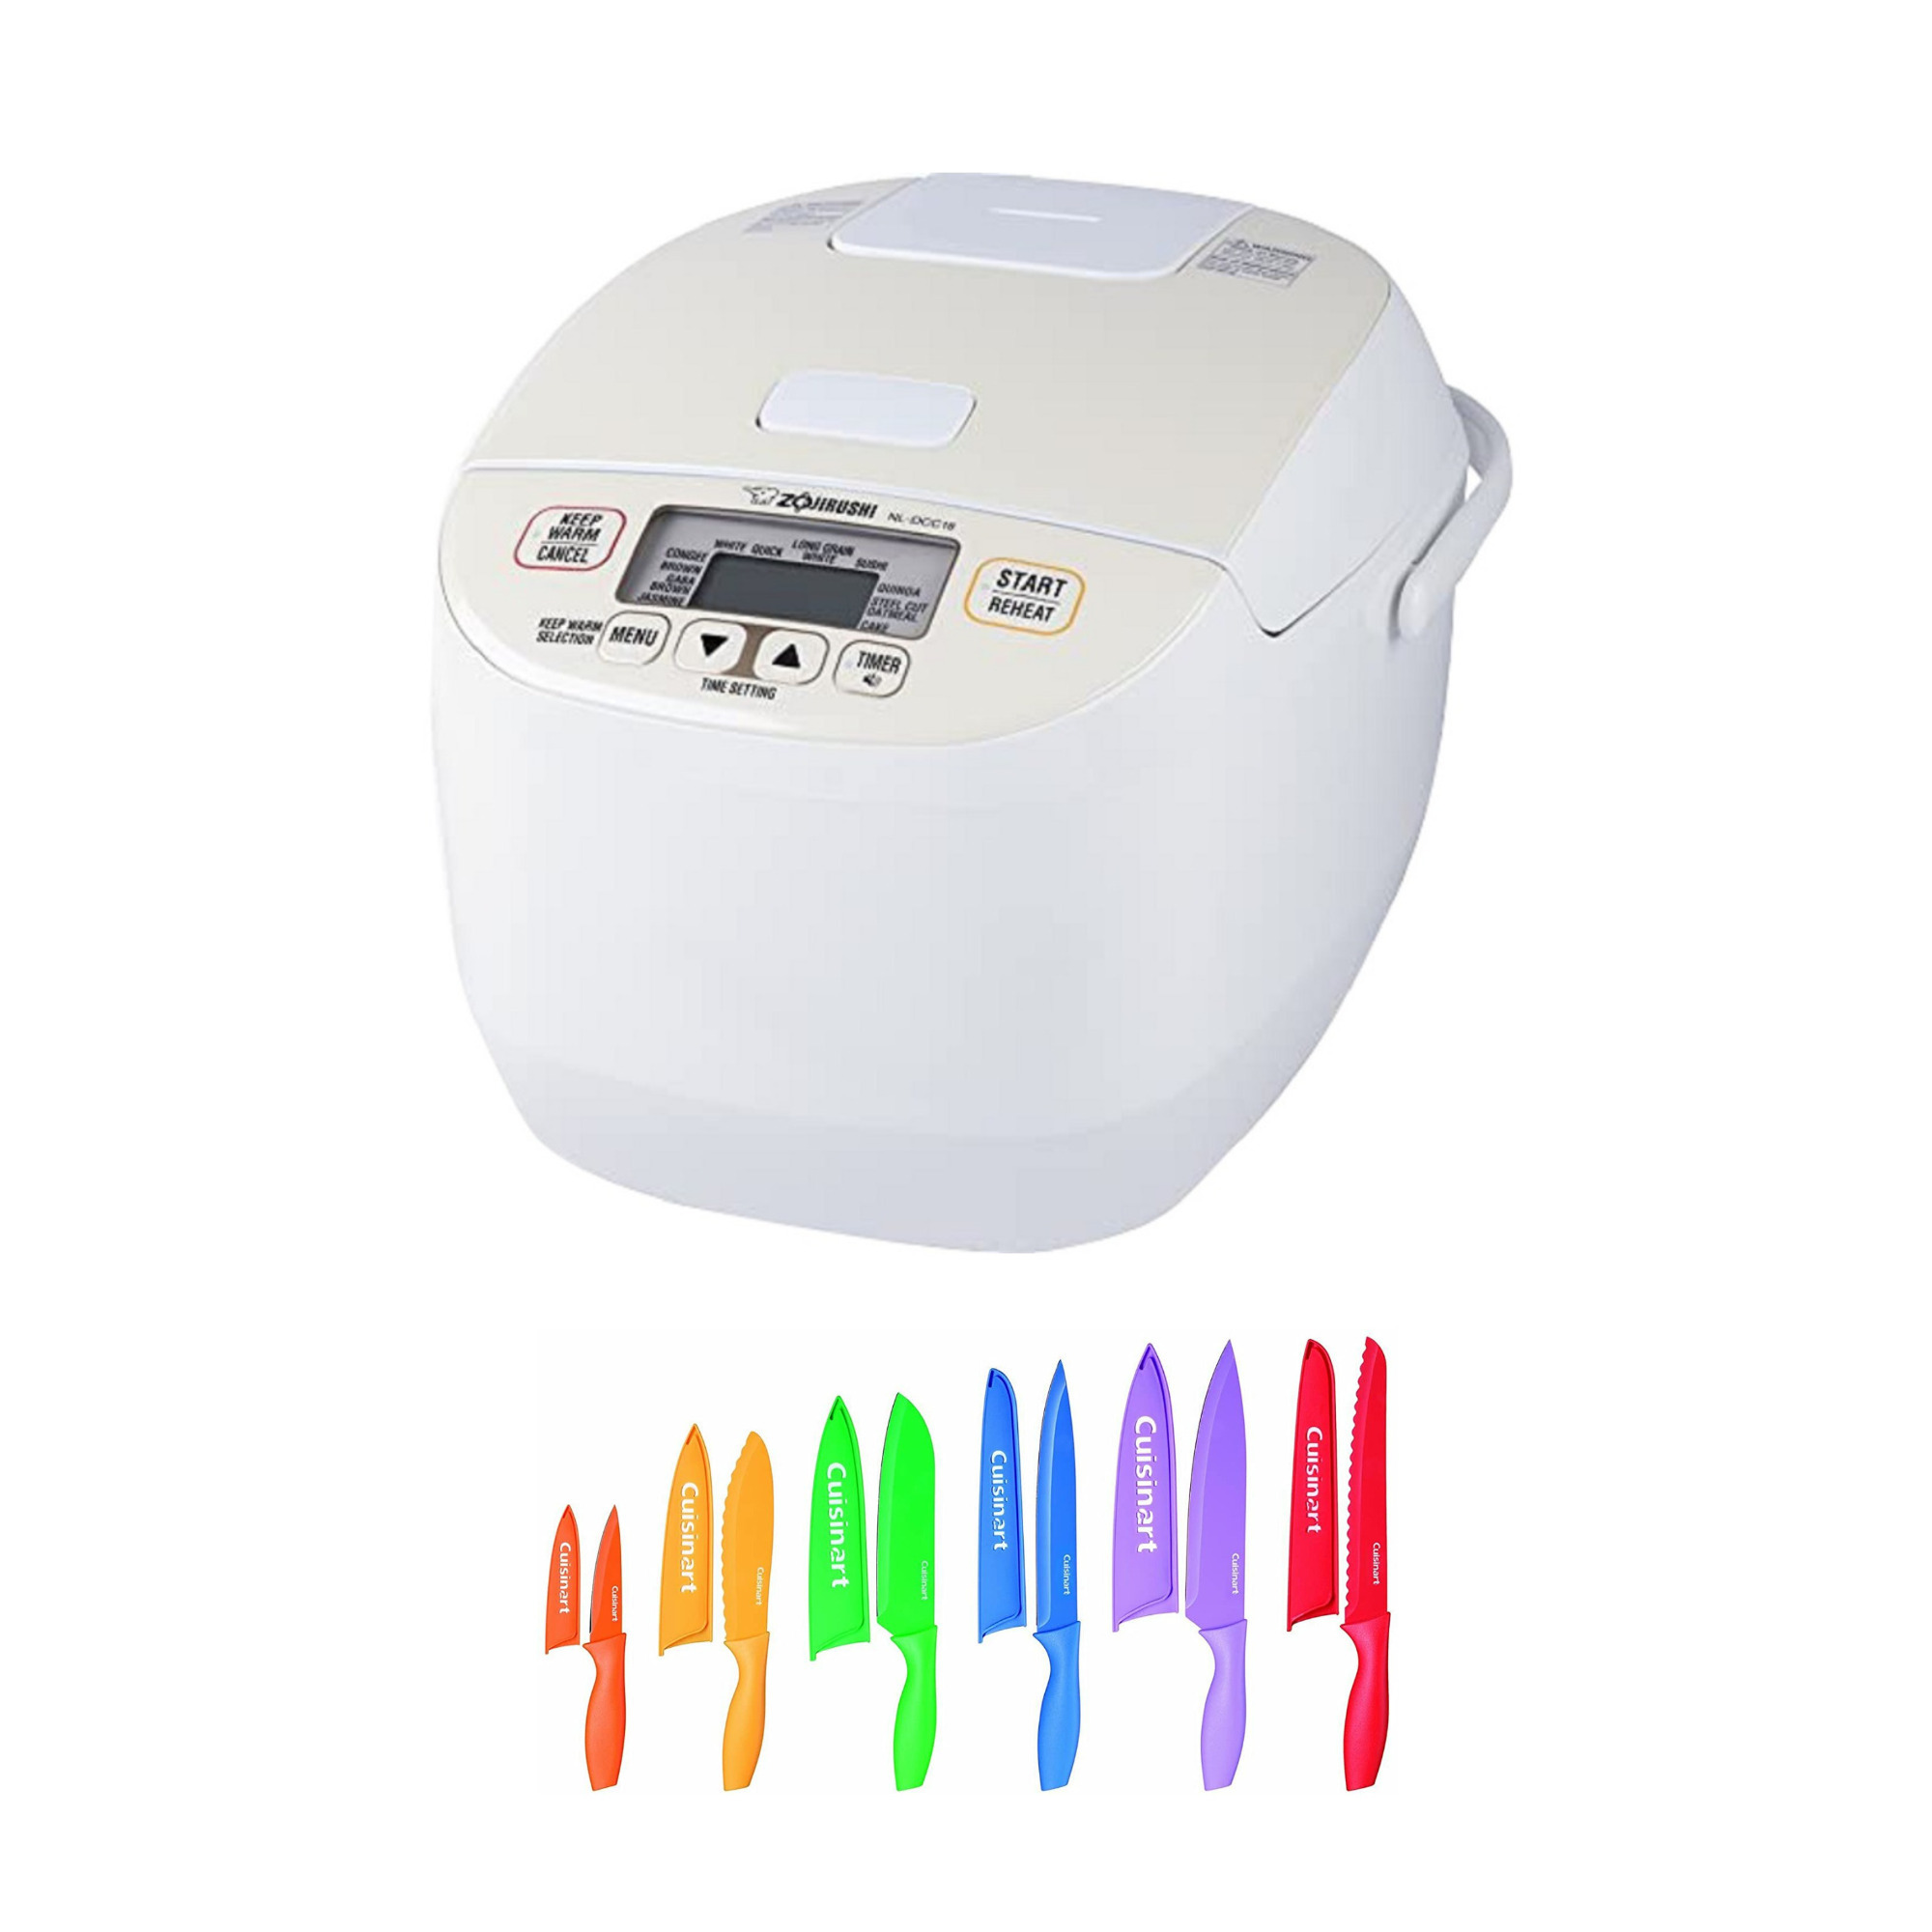 Zojirushi NL-DCC18CP Micom Rice Cooker and Warmer (Pearl Beige) with Knife set